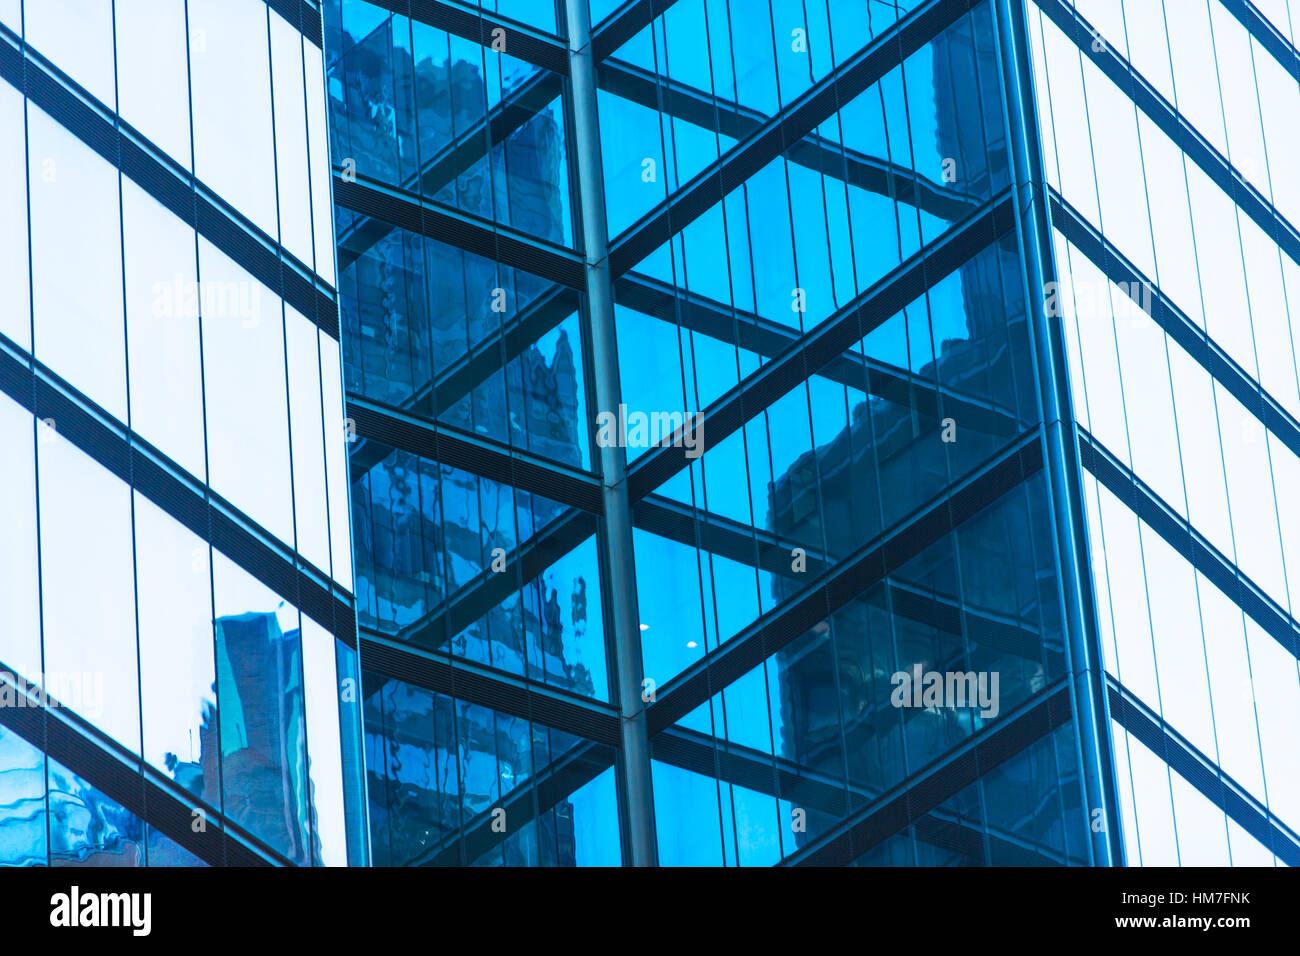 USA, New York, Reflections in office building Stock Photo